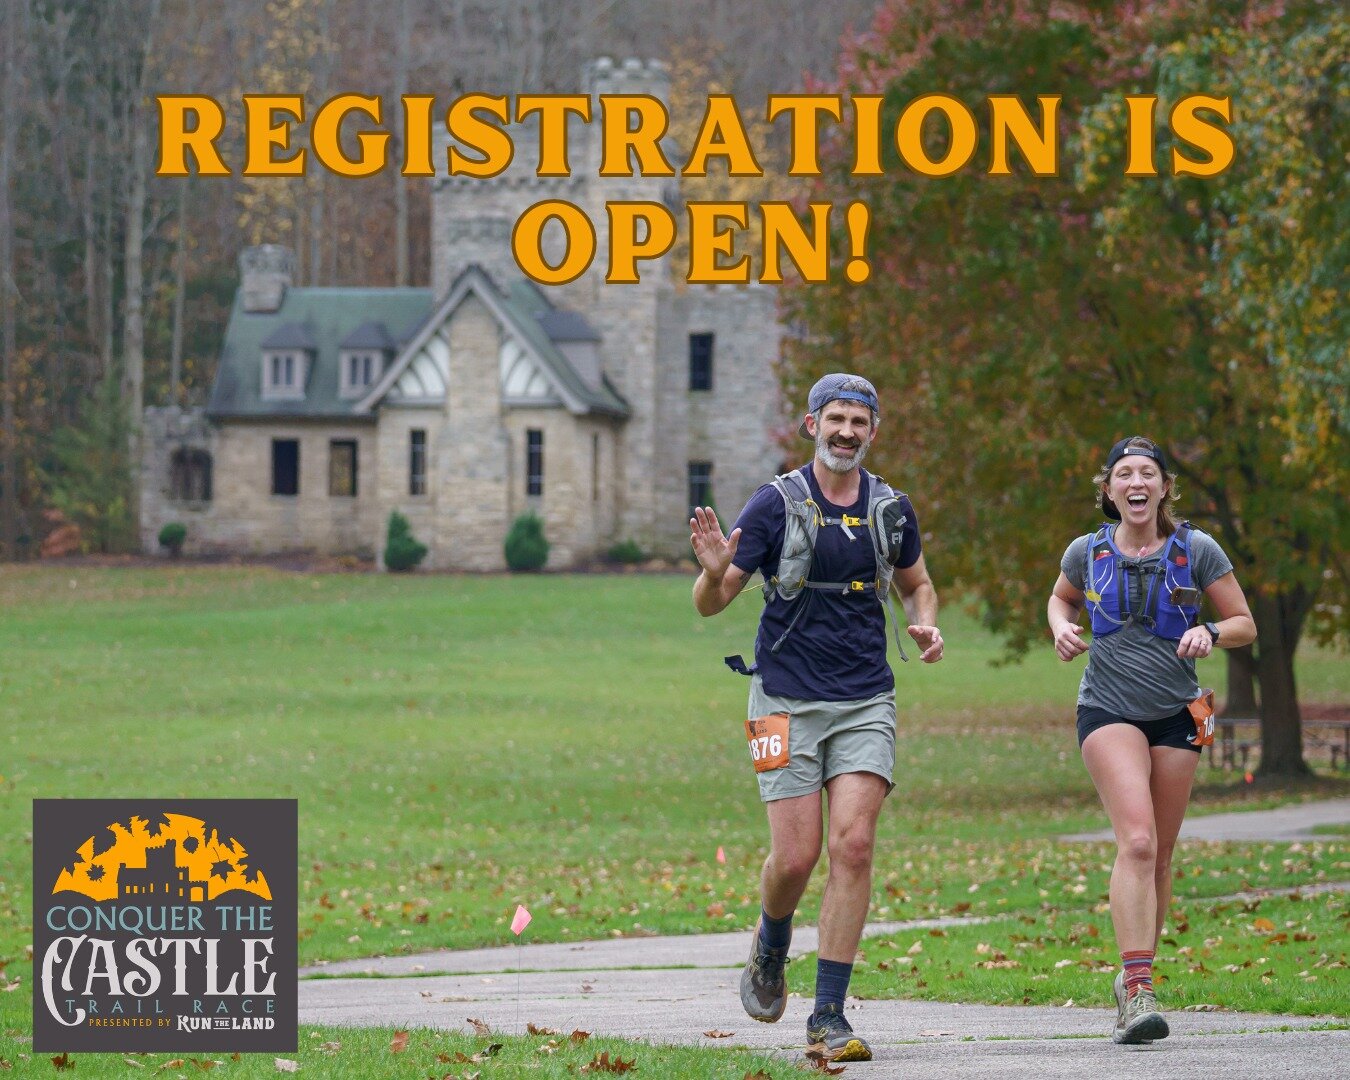 📣 Registration is OPEN for the 2024 Conquer the Castle!

Now is the time to start setting those fall race goals!
✅ Race your first 100K
✅ Set a new trail PR
✅ Race with friends

Whatever your race goal is, we can't wait to help you achieve it on Sat